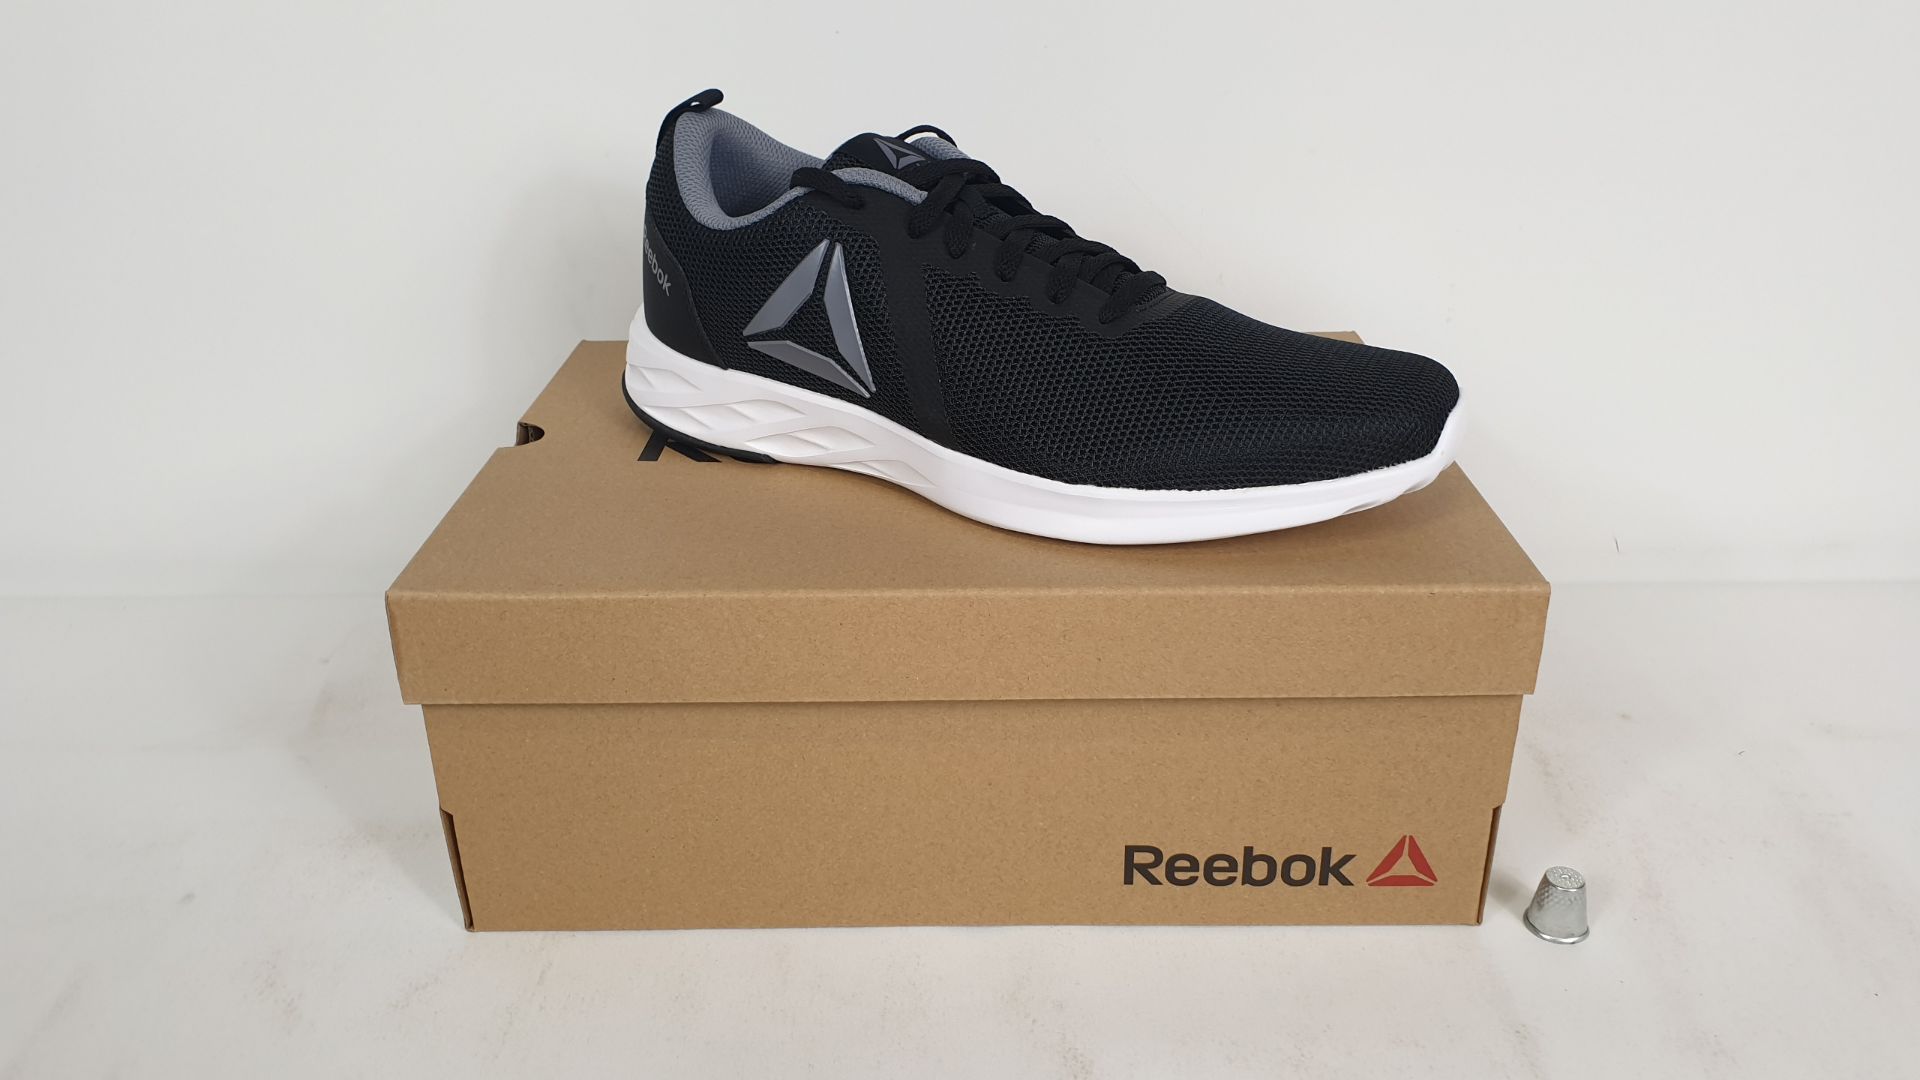 6 X PAIRS OF REEBOK TRAINERS ASTRO RIDE ESSENTIAL BLACK/ WHITE SIZE 11 - BRAND NEW AND BOXED